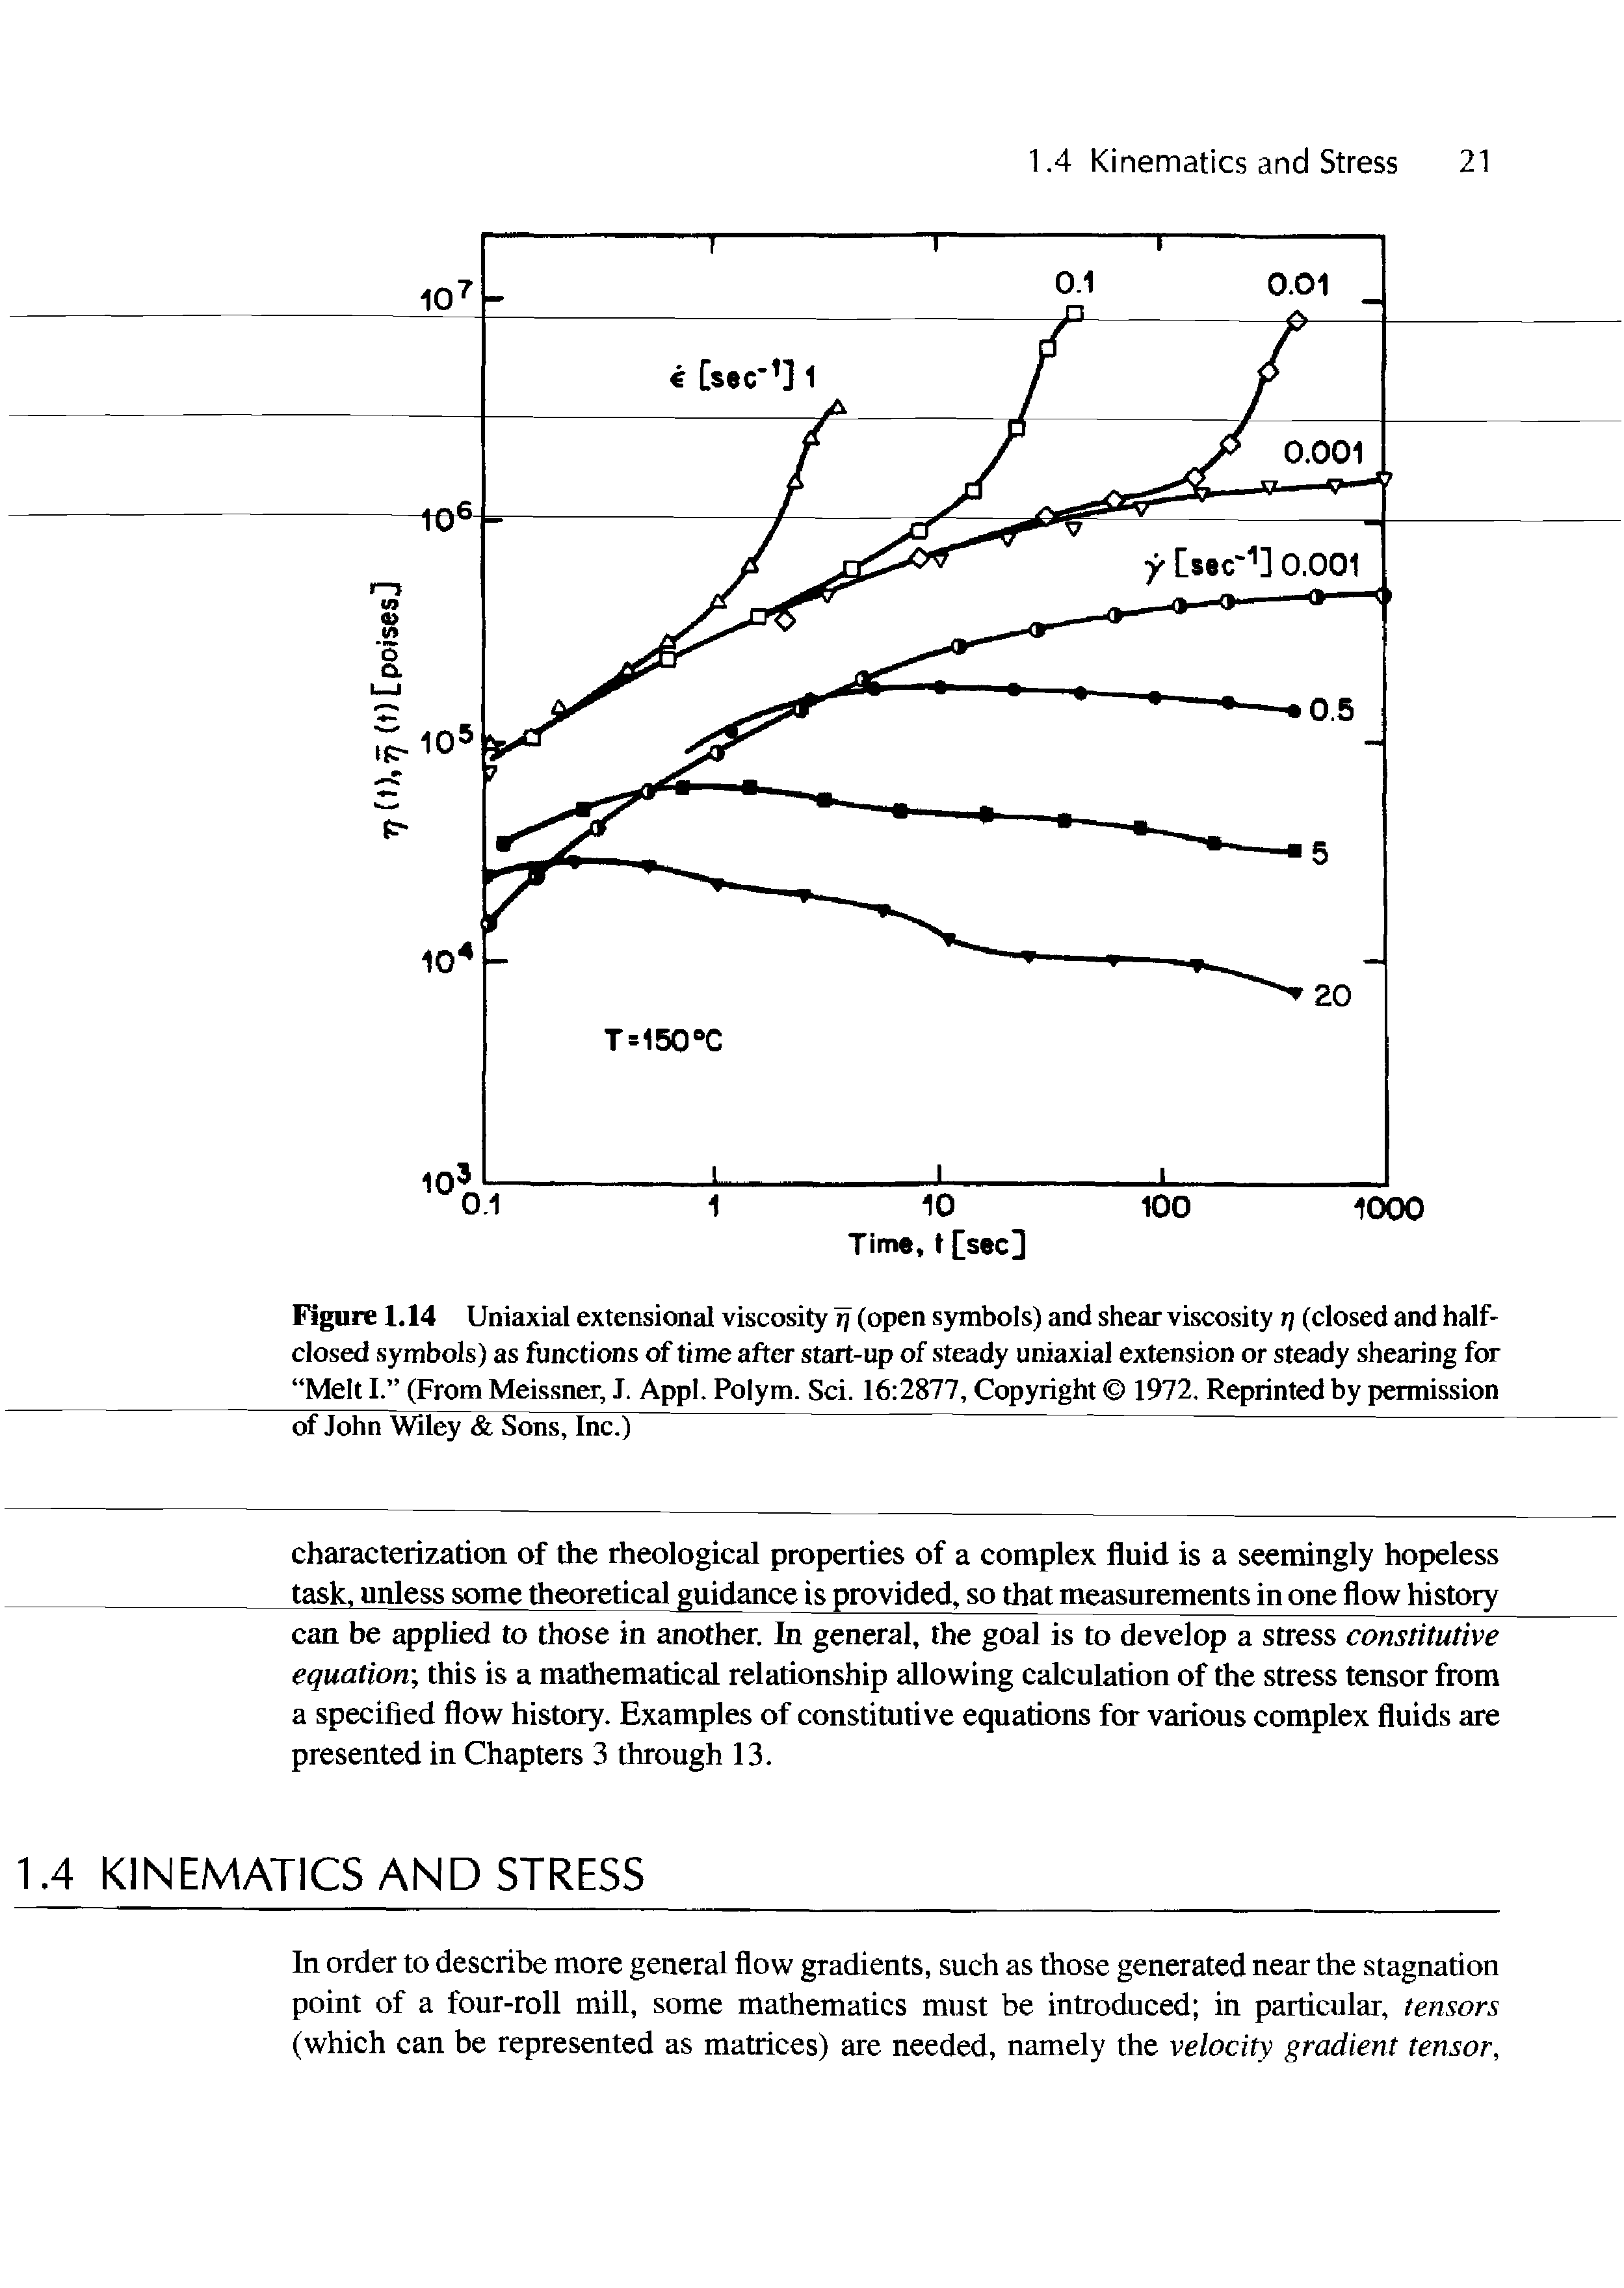 Figure 1.14 Uniaxial extensional viscosity rj (open symbols) and shear viscosity r] (closed and half-closed symbols) as functions of time after start-up of steady uniaxial extension or steady shearing for Melt I. (From Meissner, J. Appl. Polym. Sci. 16 2877, Copyright 1972. Reprinted by permission...